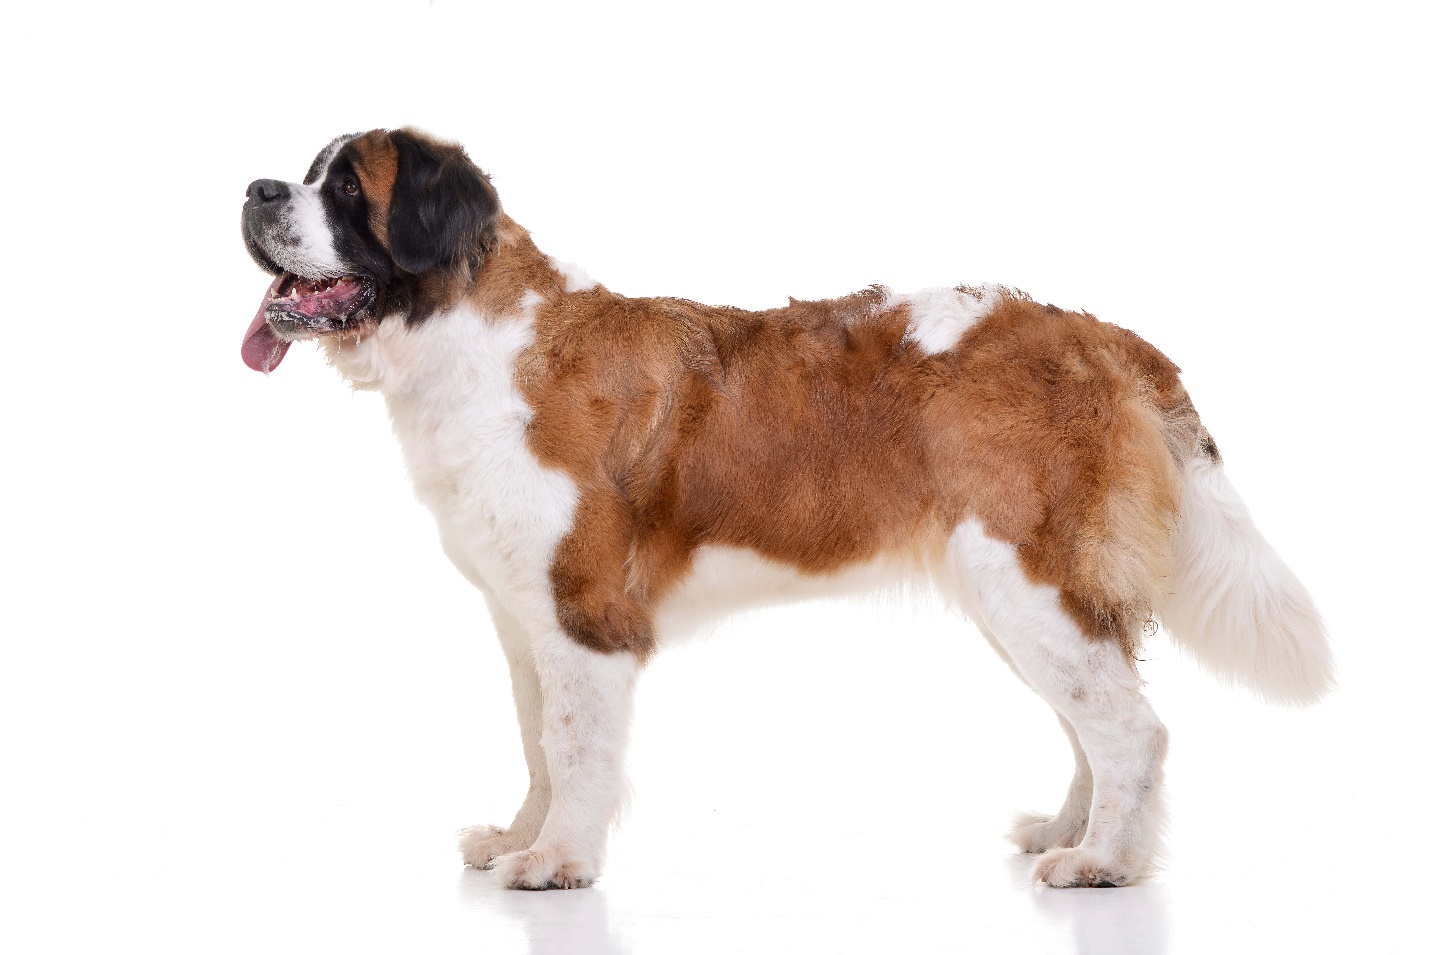 A dog standing on a white background

Description automatically generated with low confidence